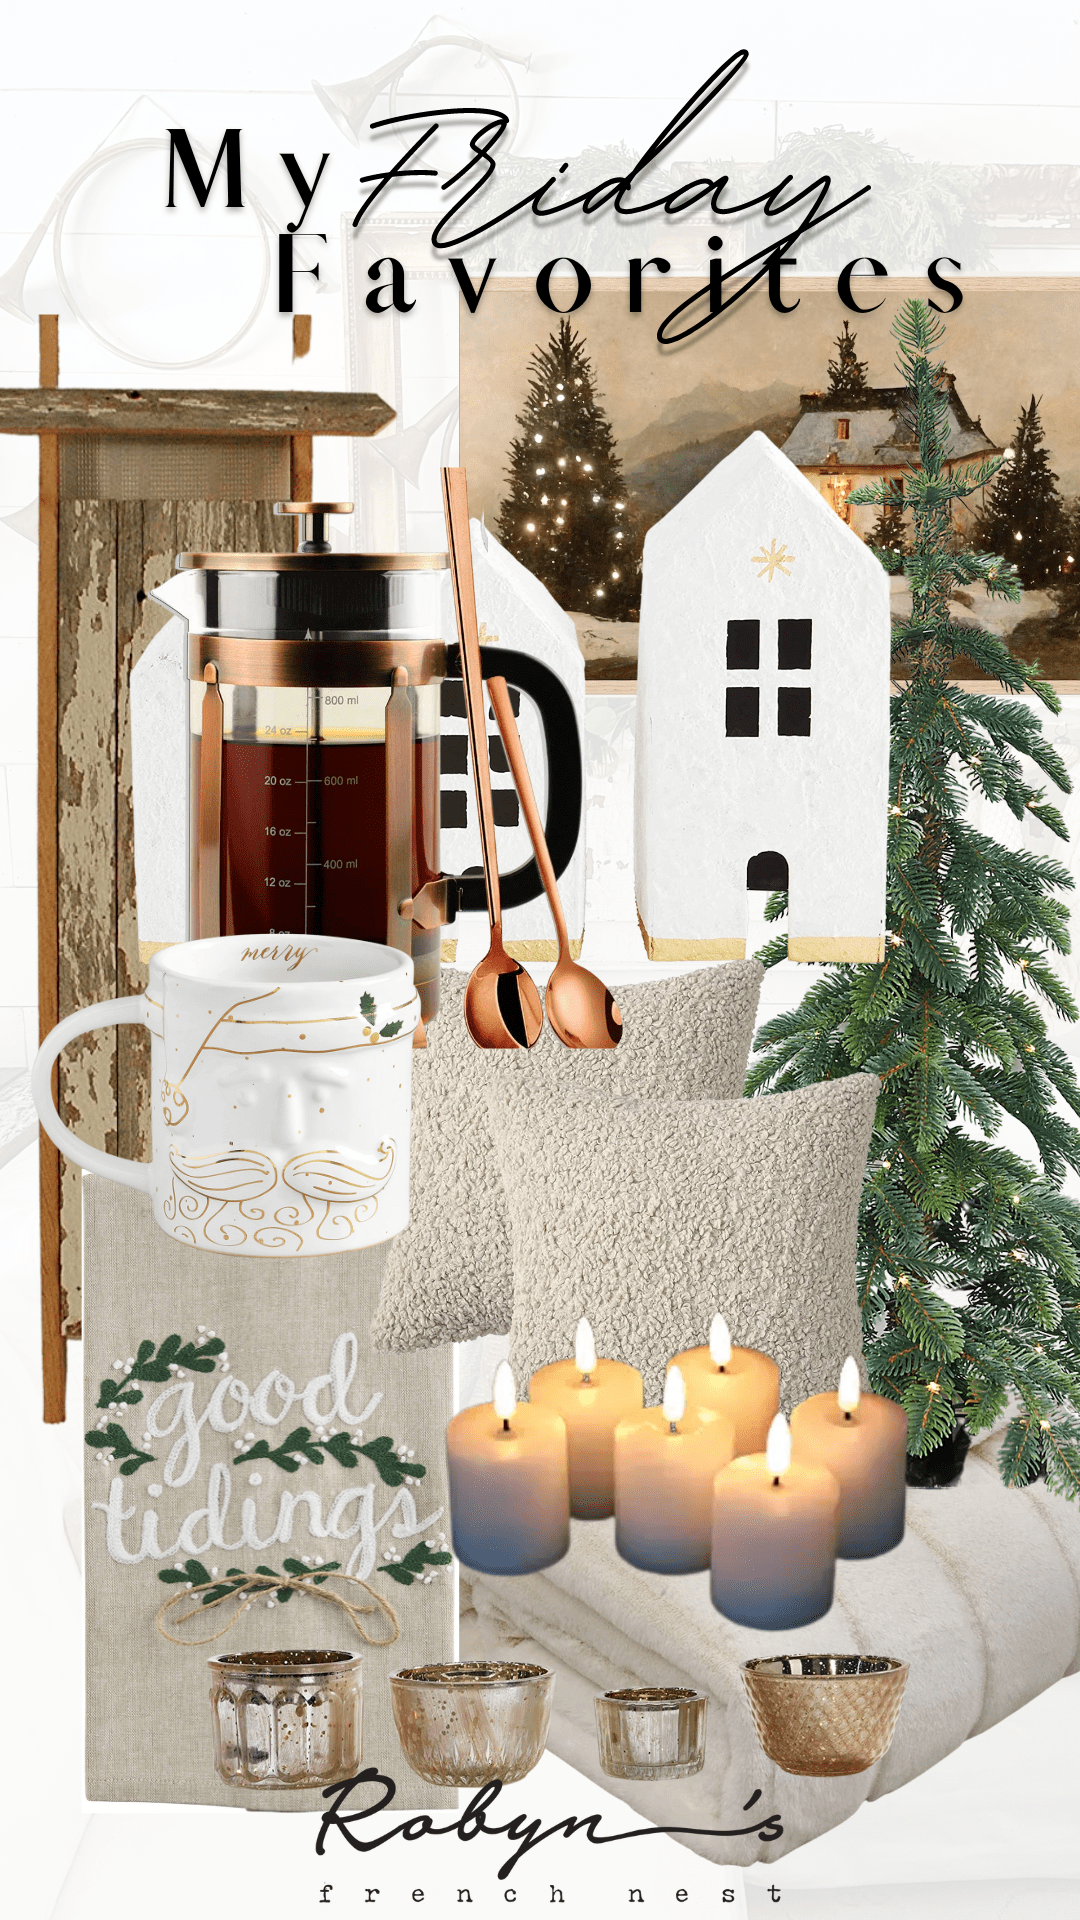 Friday Favorites- Home For the Holidays